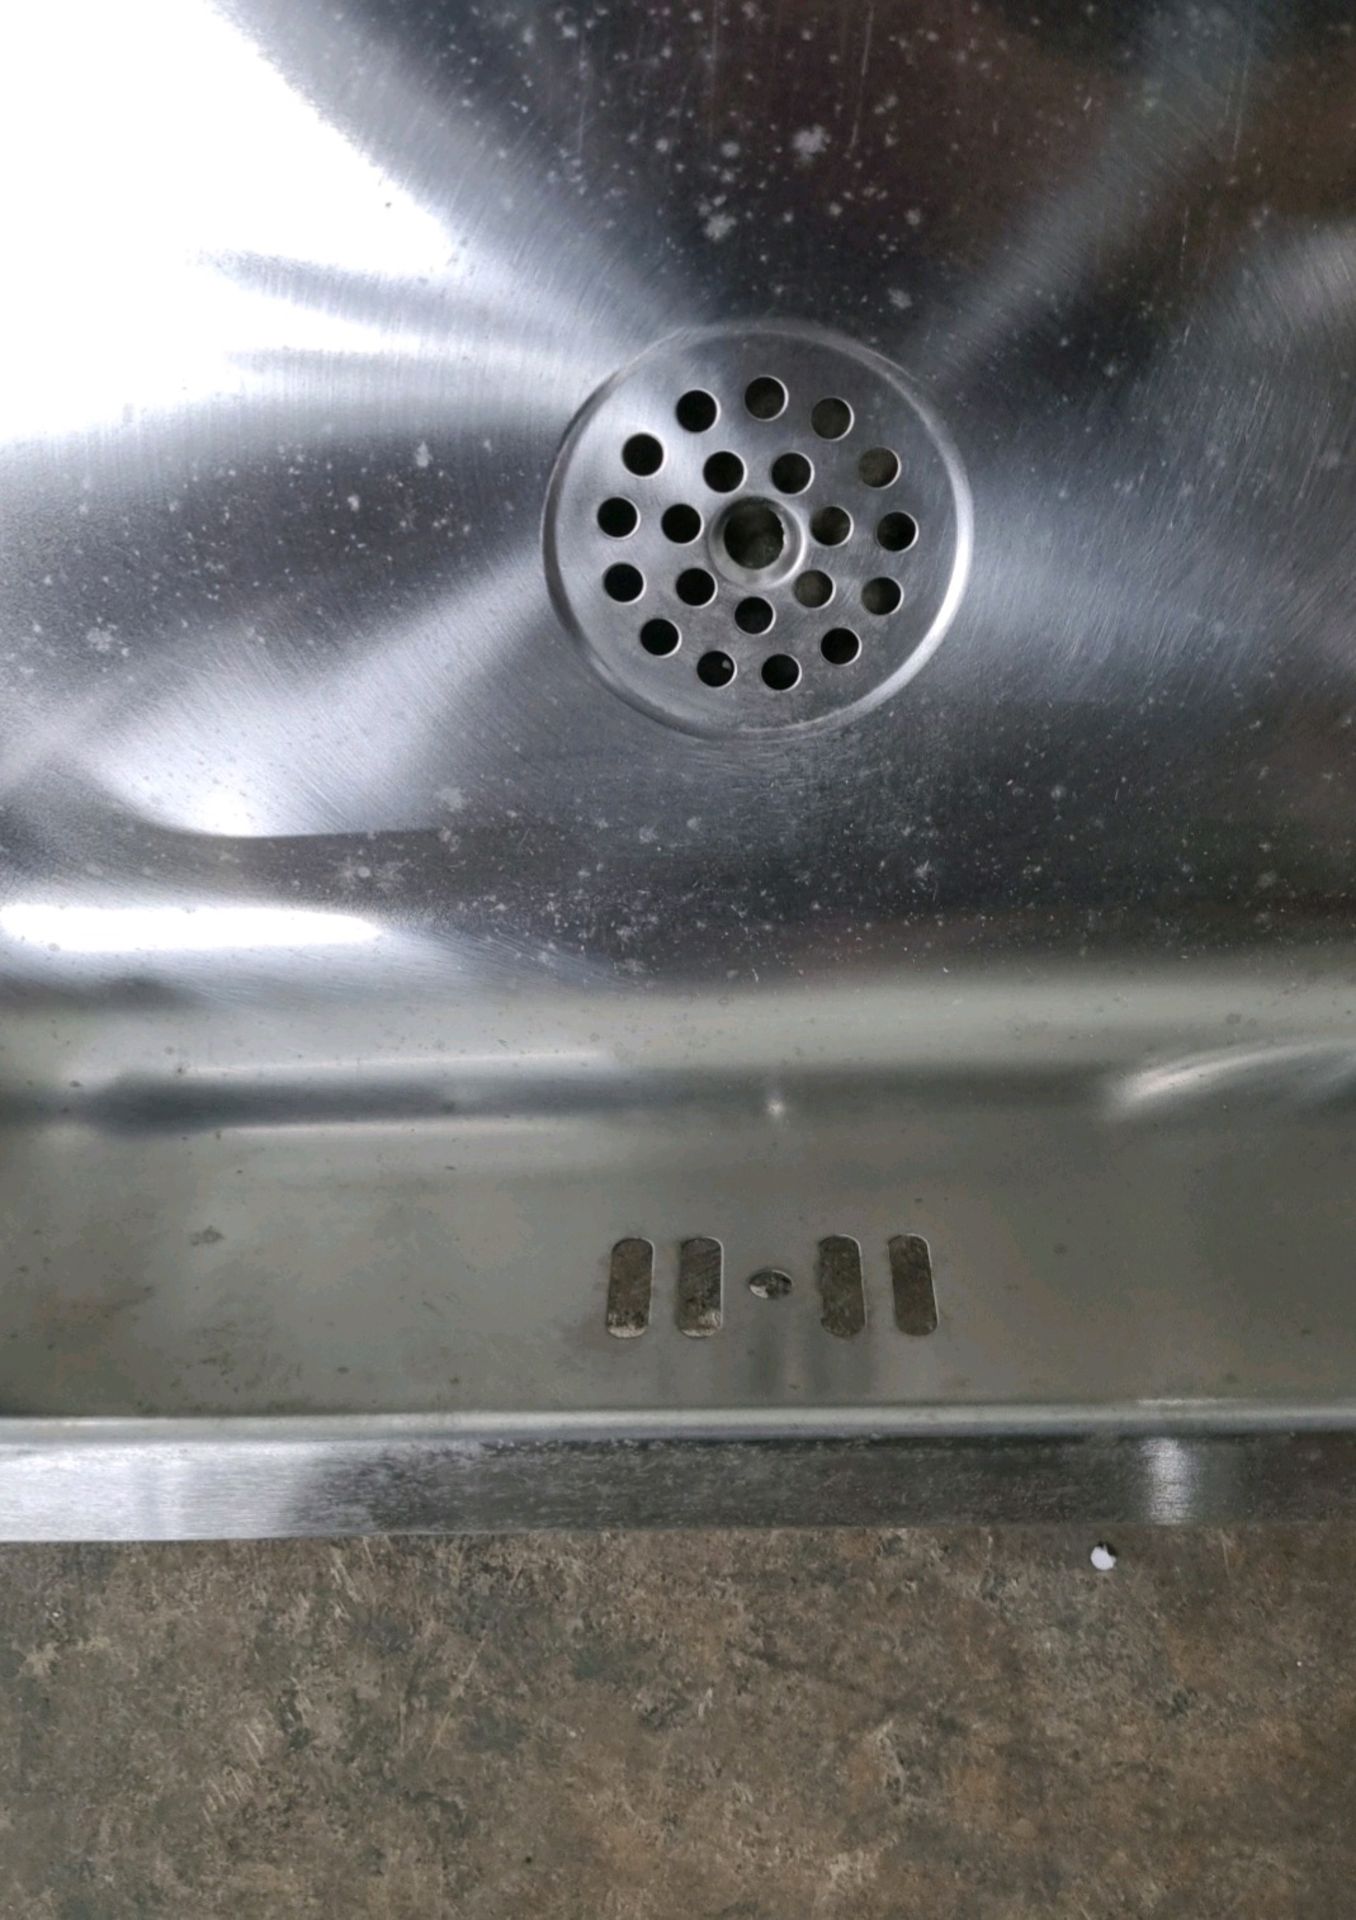 Panda SEK400-100 Stainless Steel Single Bowl Inset Sink With Clips 400mm x 540mm - Image 6 of 7